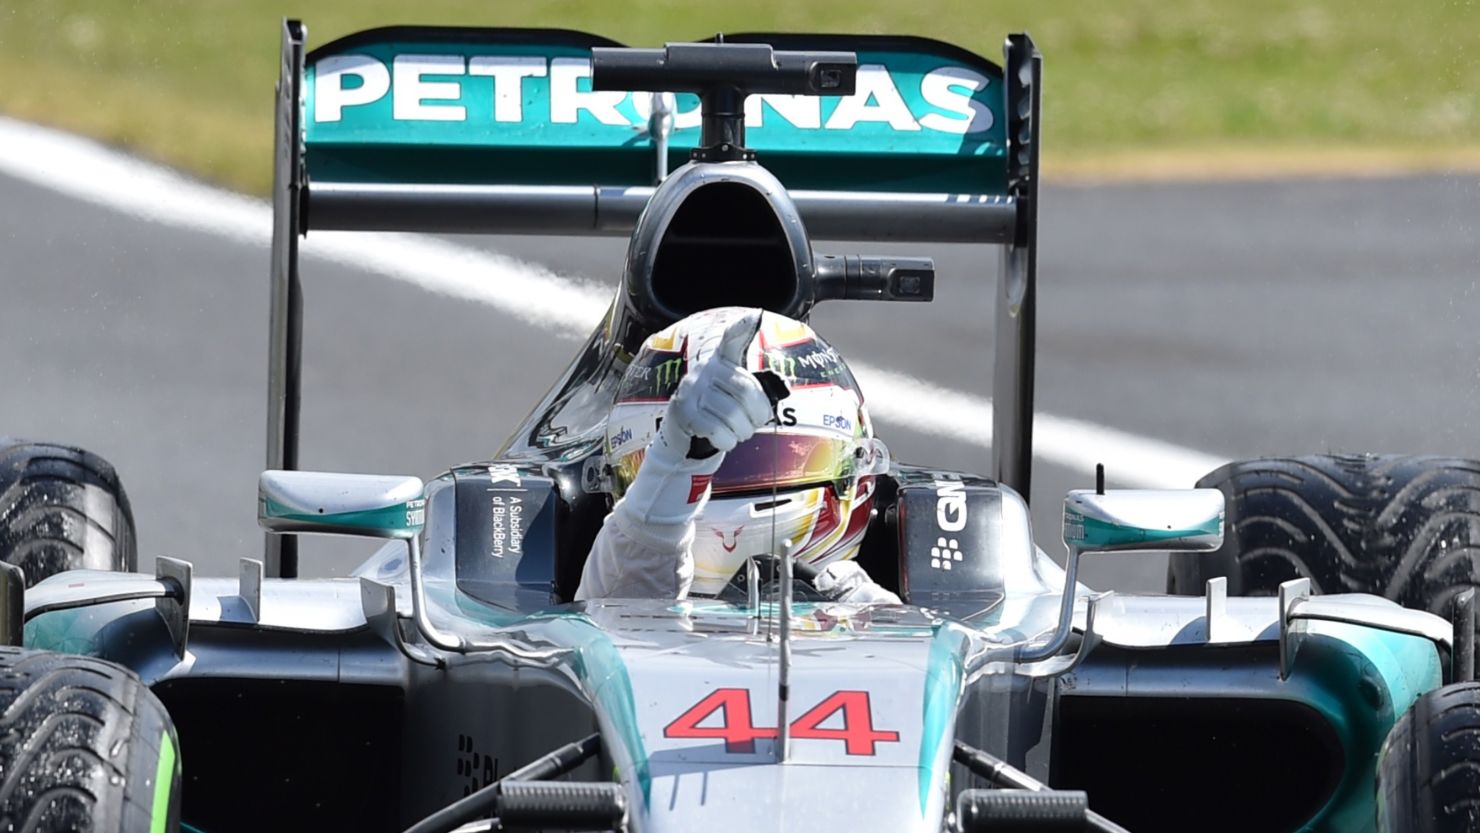 World champion Lewis Hamilton stormed to 11 pole positions in 2015 - but will the new qualifying rules stop his charge in 2016?